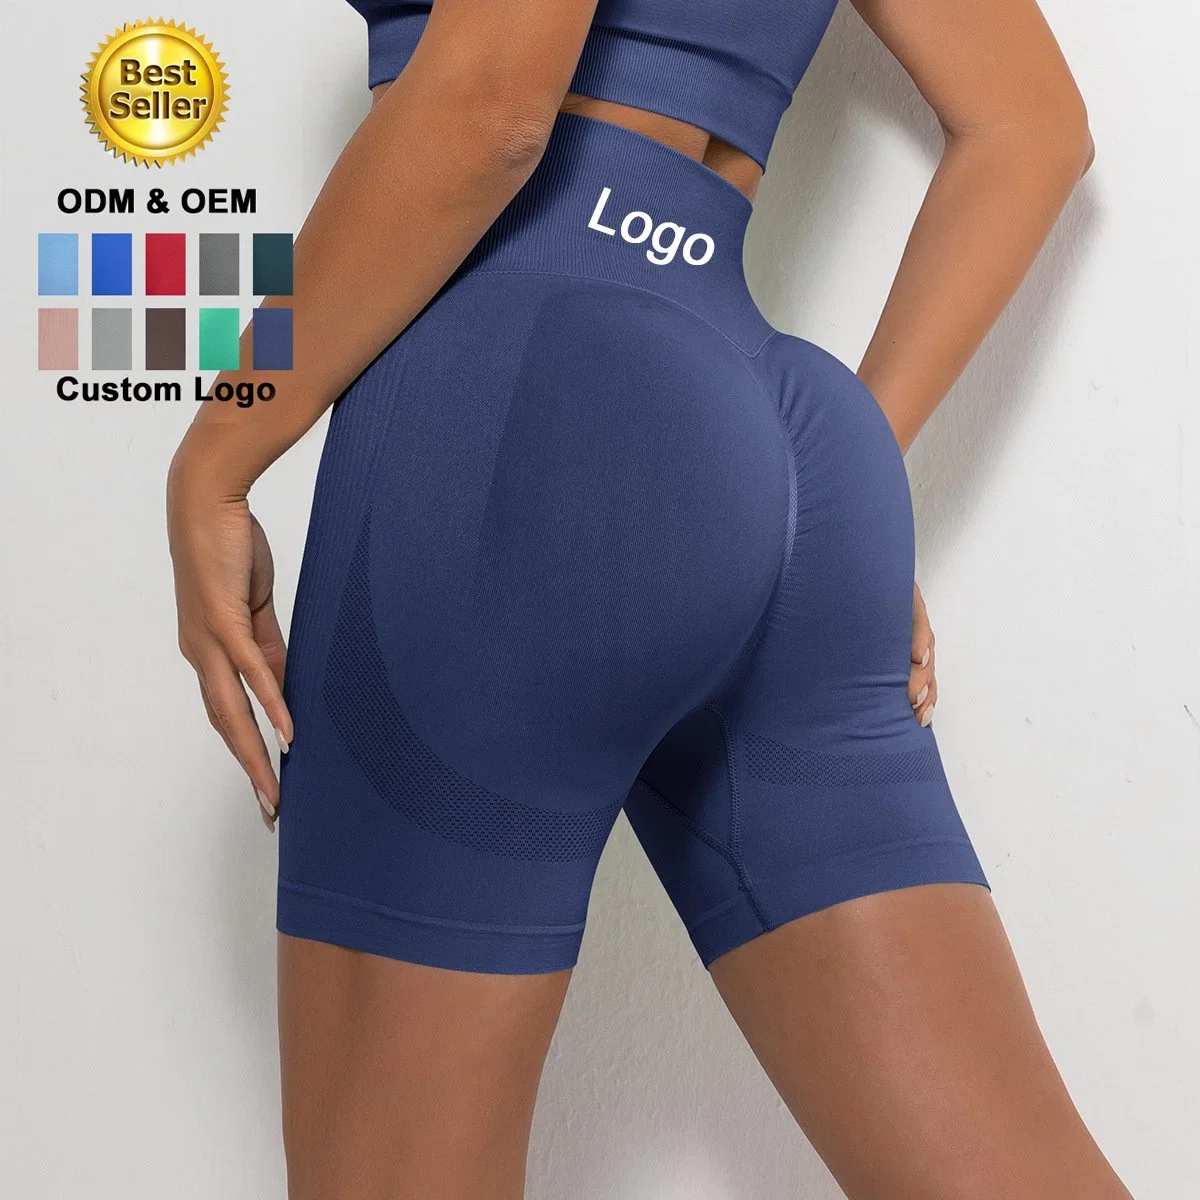 Wholesale High Waisted Seamless Gym Sports Women Yoga Shorts Breathable Slim Fit Sweatpants Sexy Peach Butt Hip Lift Workout Short